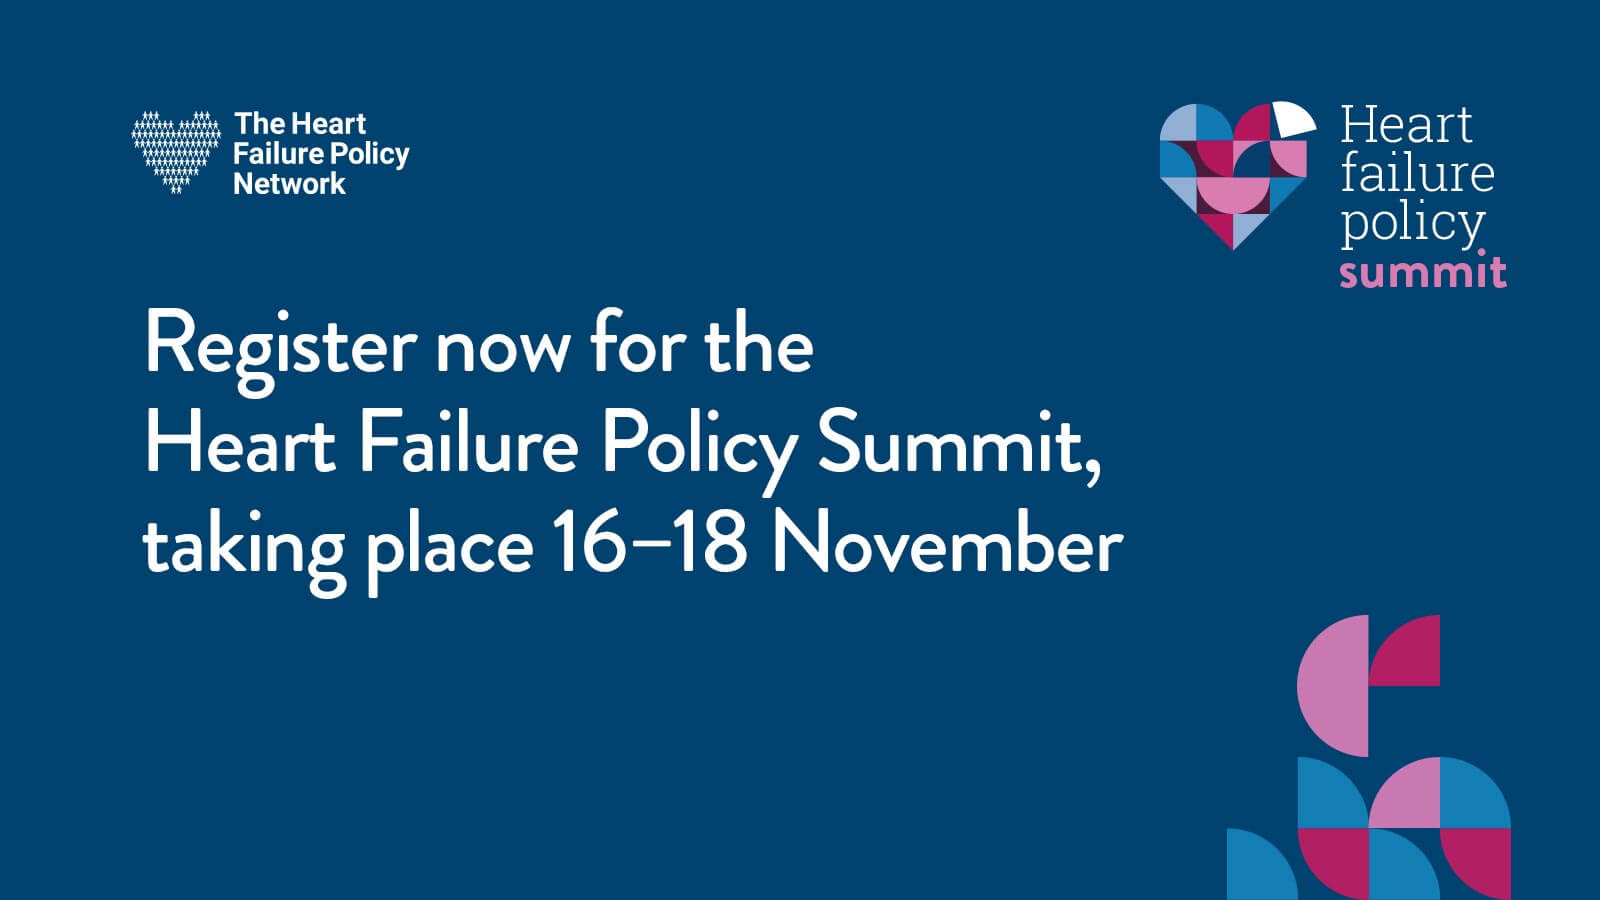 Heart Failure Policy Summit – 16 to 18 November 